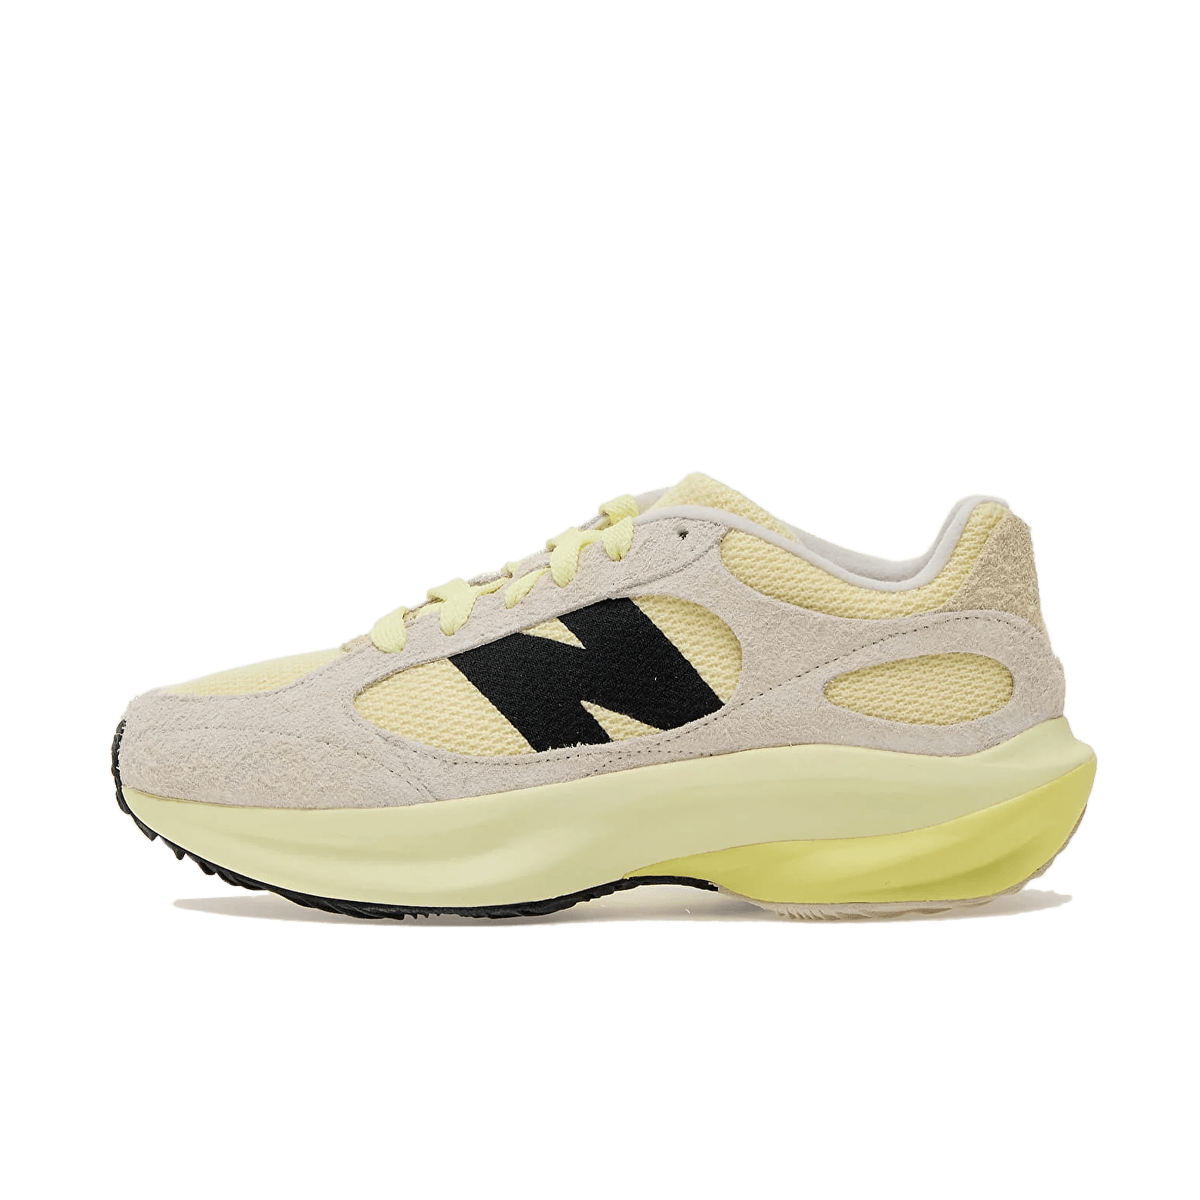 New Balance WRPD Runner 'Electric Yellow' - Pastel Pack UWRPDSFB